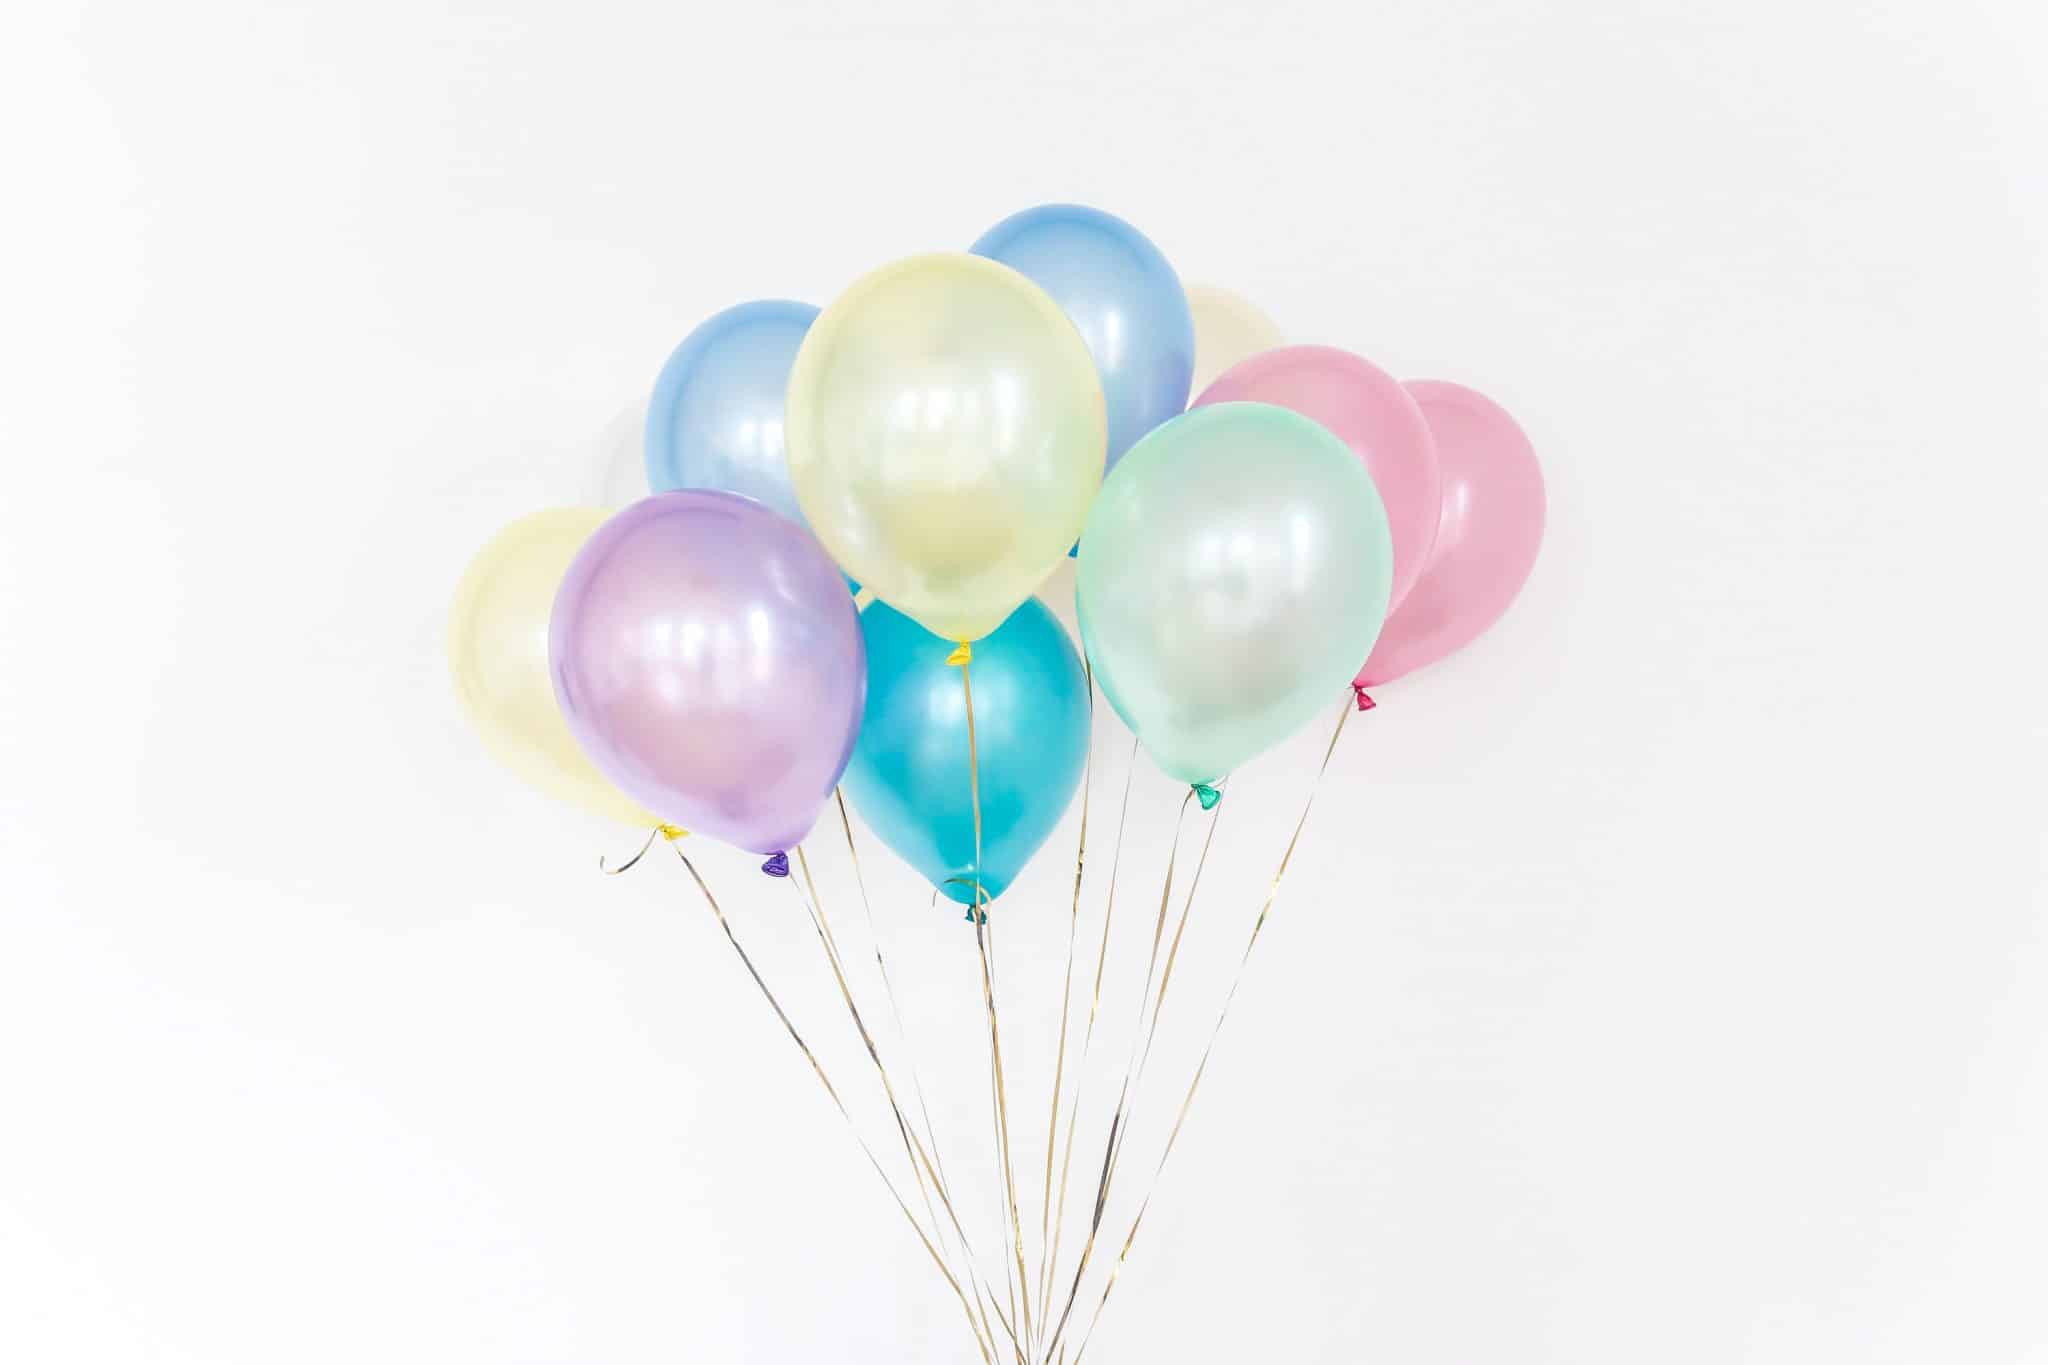 Colorful balloons against a white background.